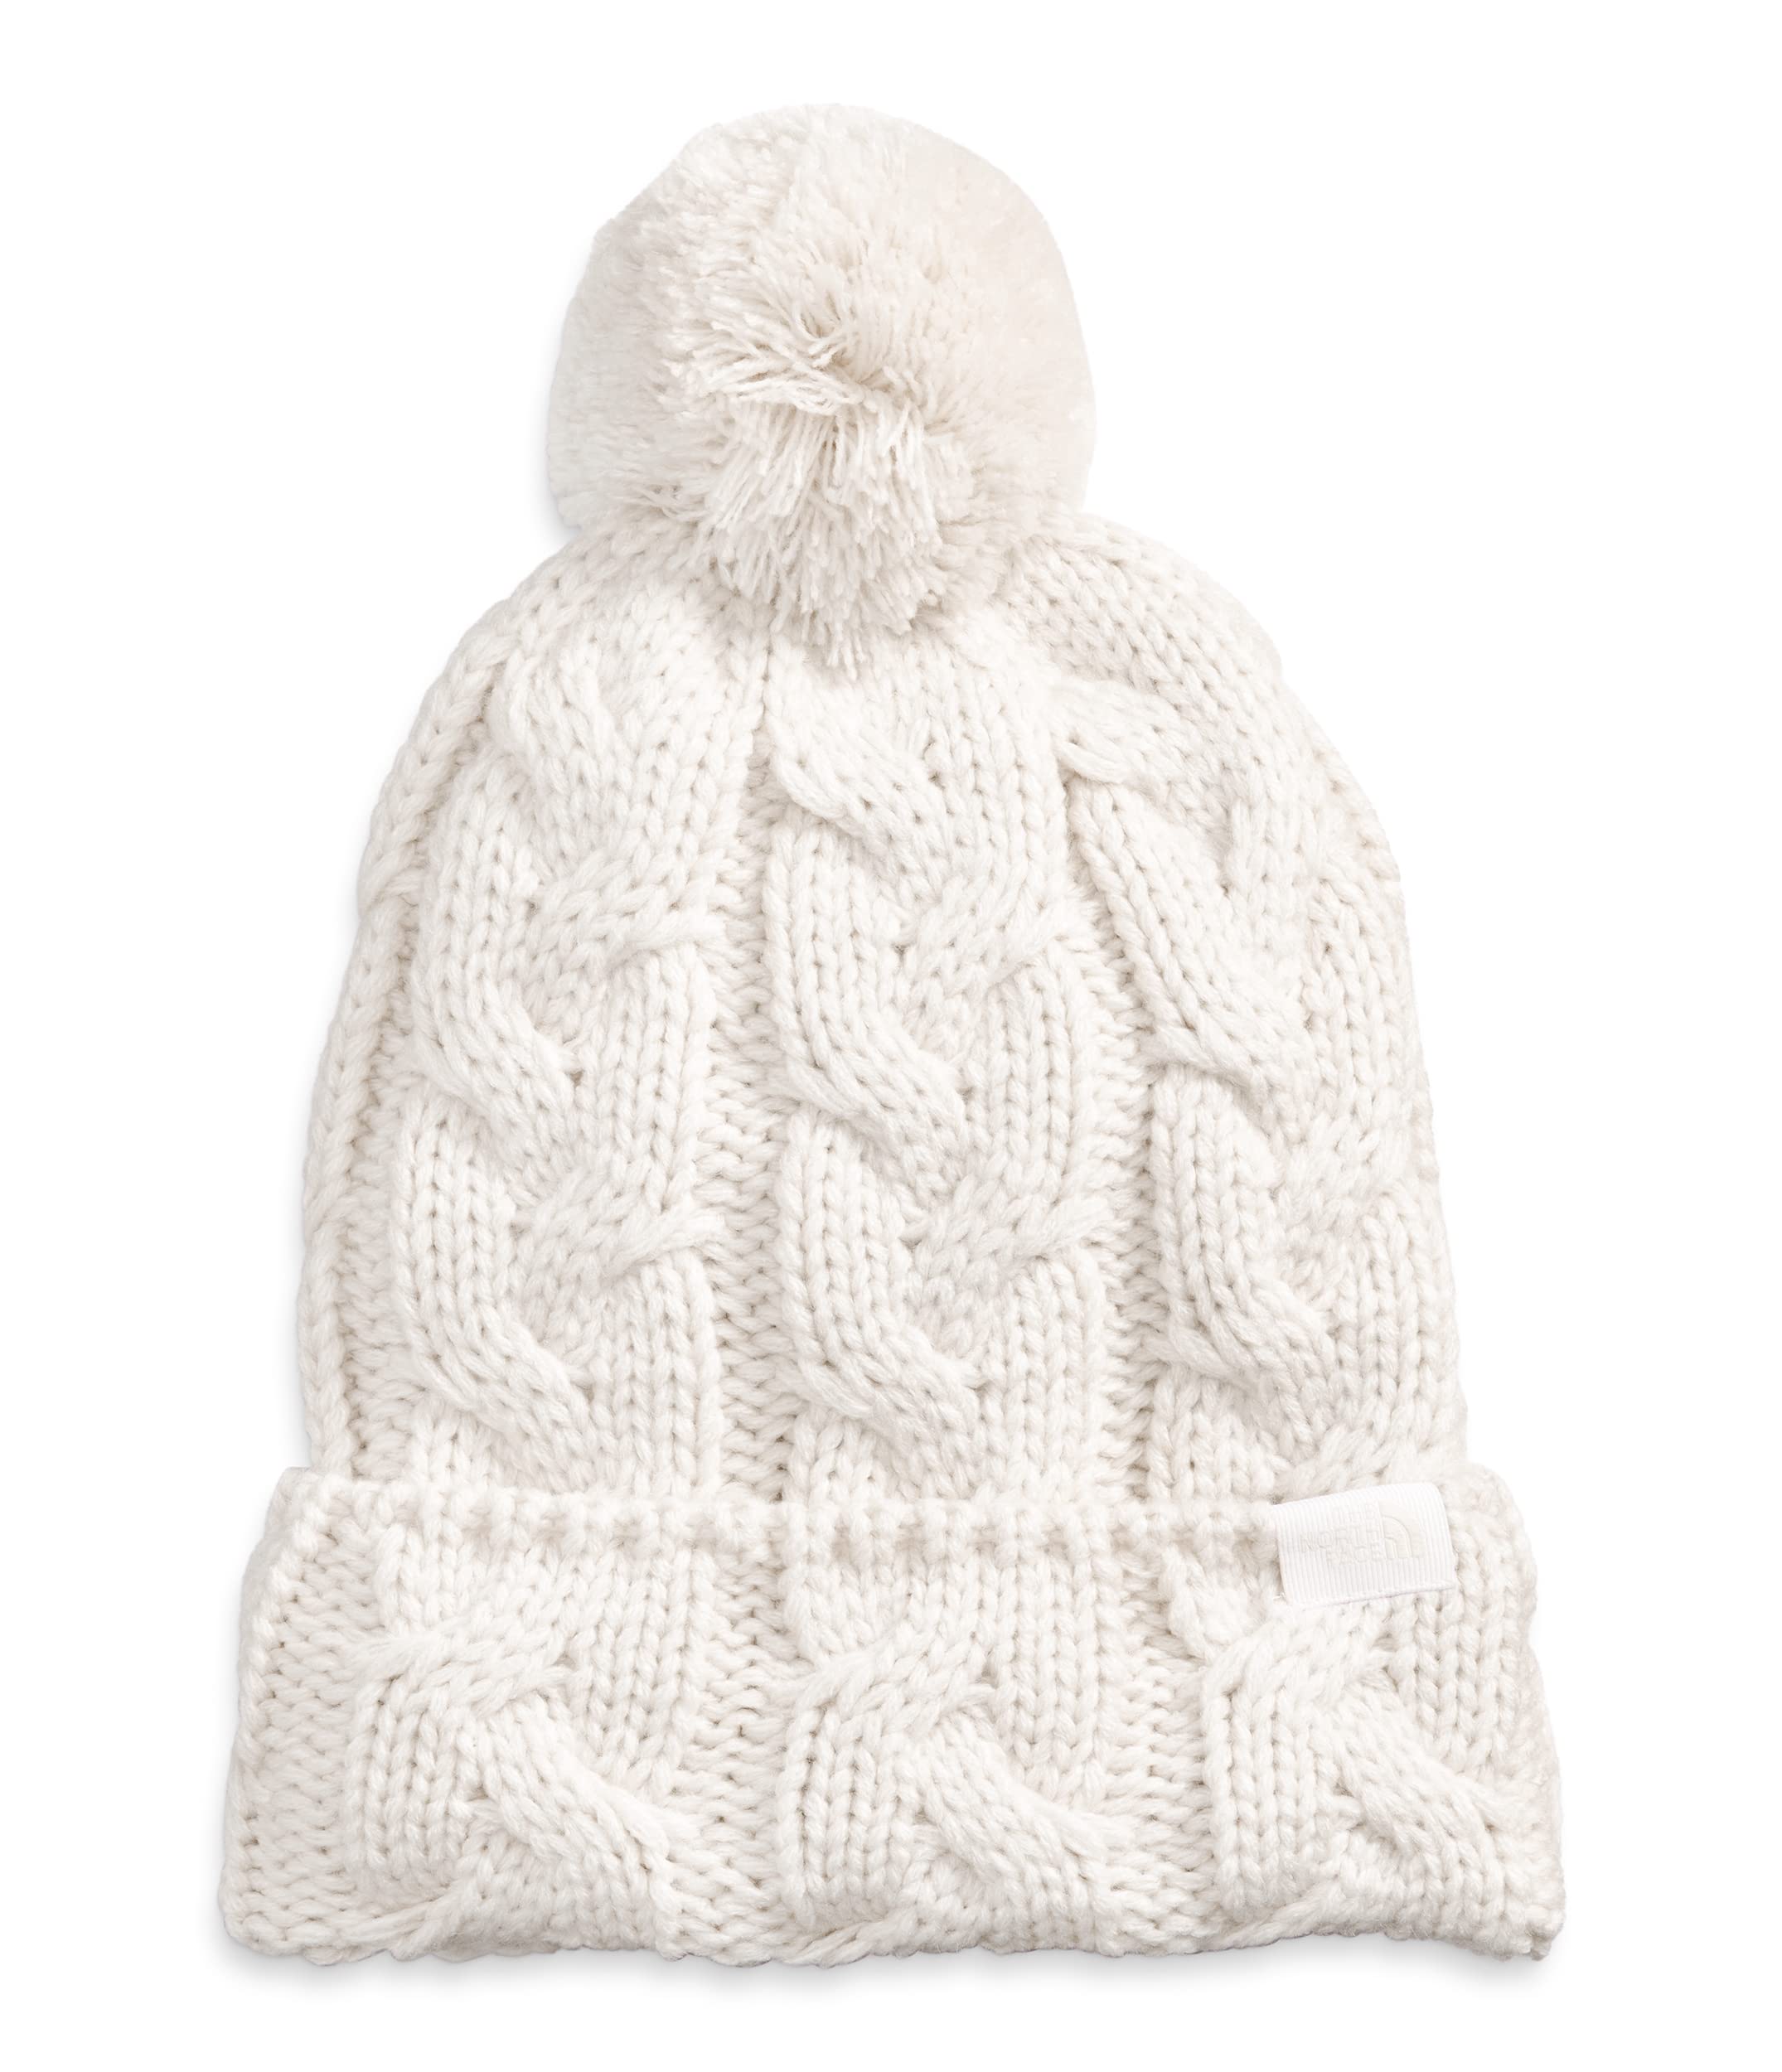 THE NORTH FACE Cable Minna Pom Beanie, Gardenia White, One Size